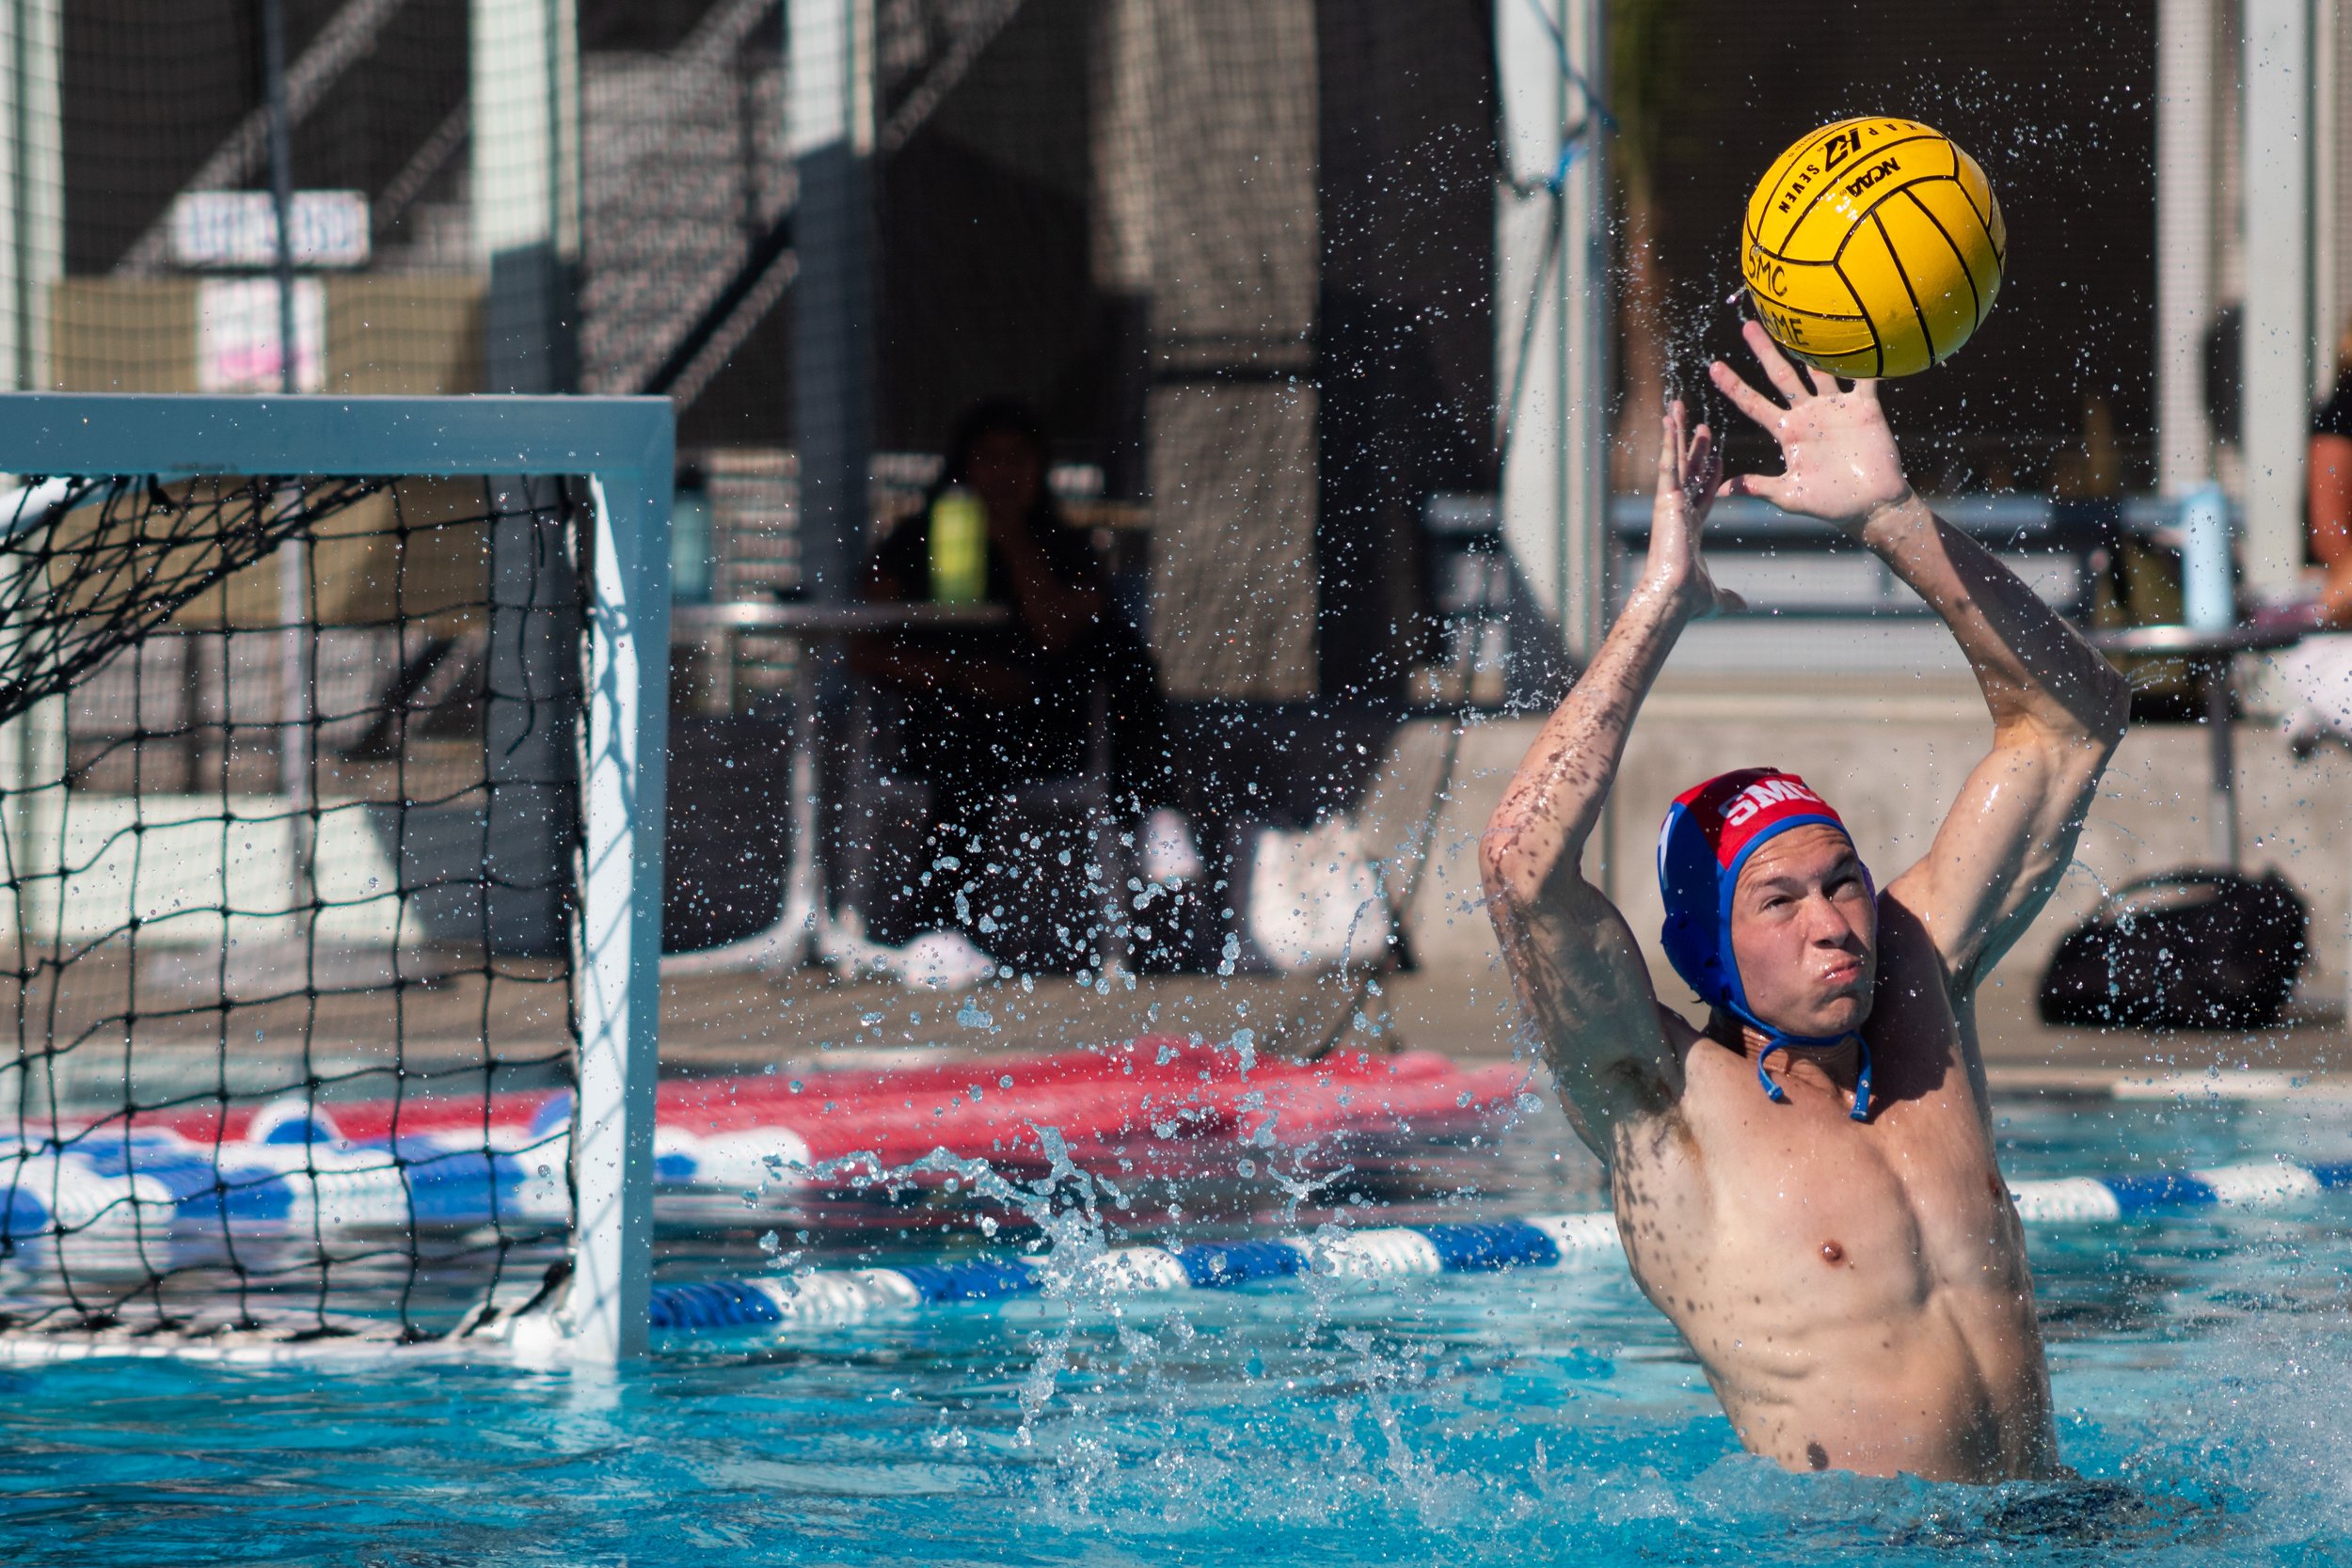  Santa Monica College Corsair Landon Sodi blocking a goal attempt during a home game against the Los Angeles Valley College Monarchs. The Corsairs lost 23-4. Santa Monica, Calif. on Sept. 28, 2022. (Caylo Seals | The Corsair) 